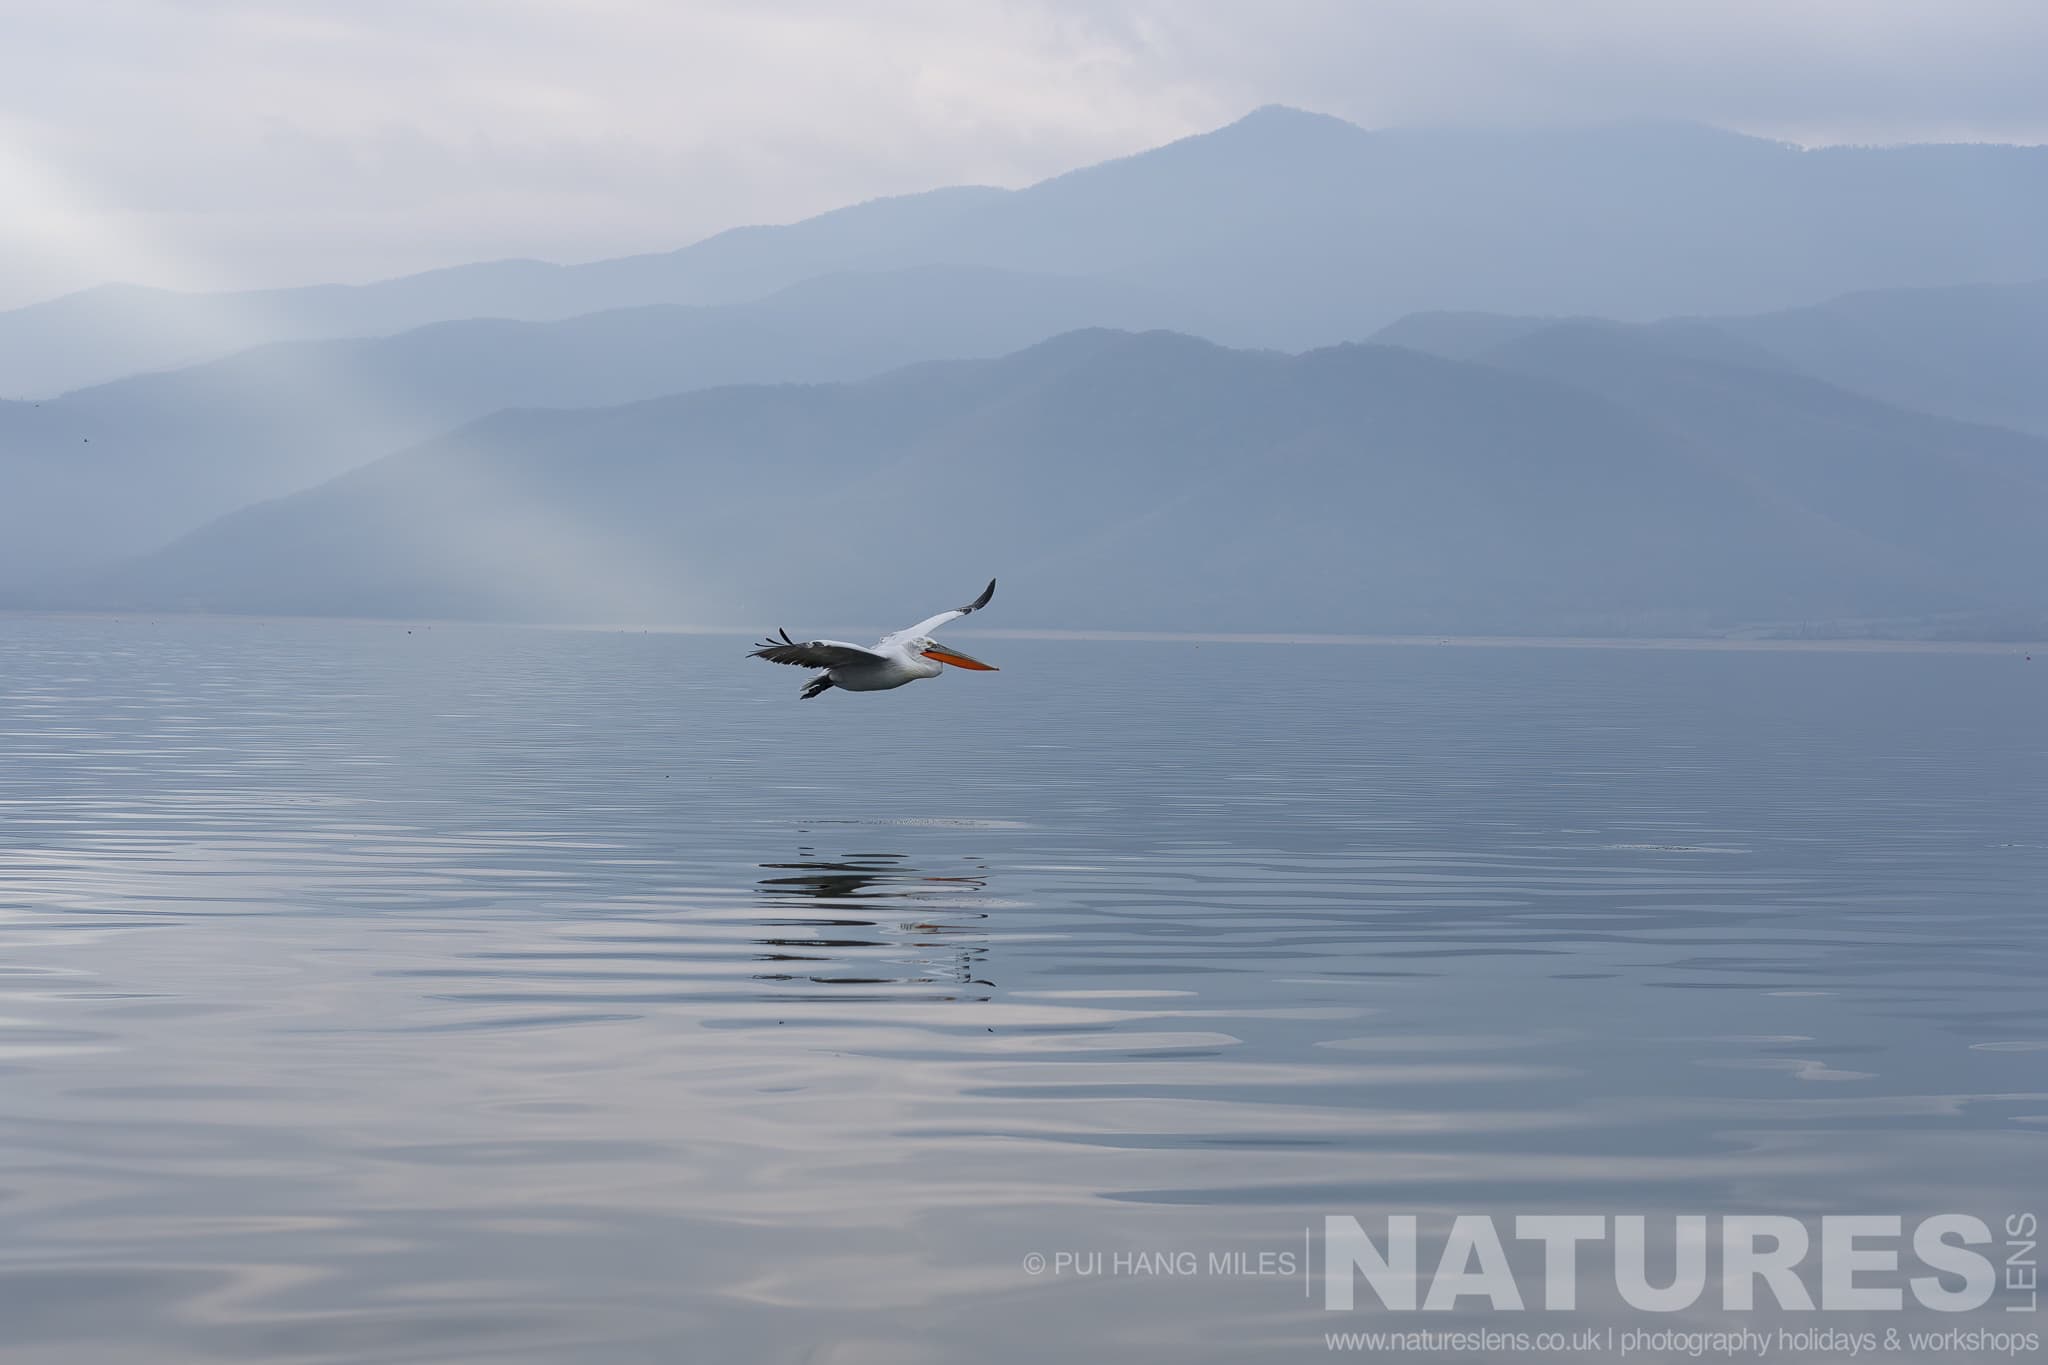 One Of The Dalmatian Pelicans Of Greece Flies Over The Waters Of Lake Kerkini